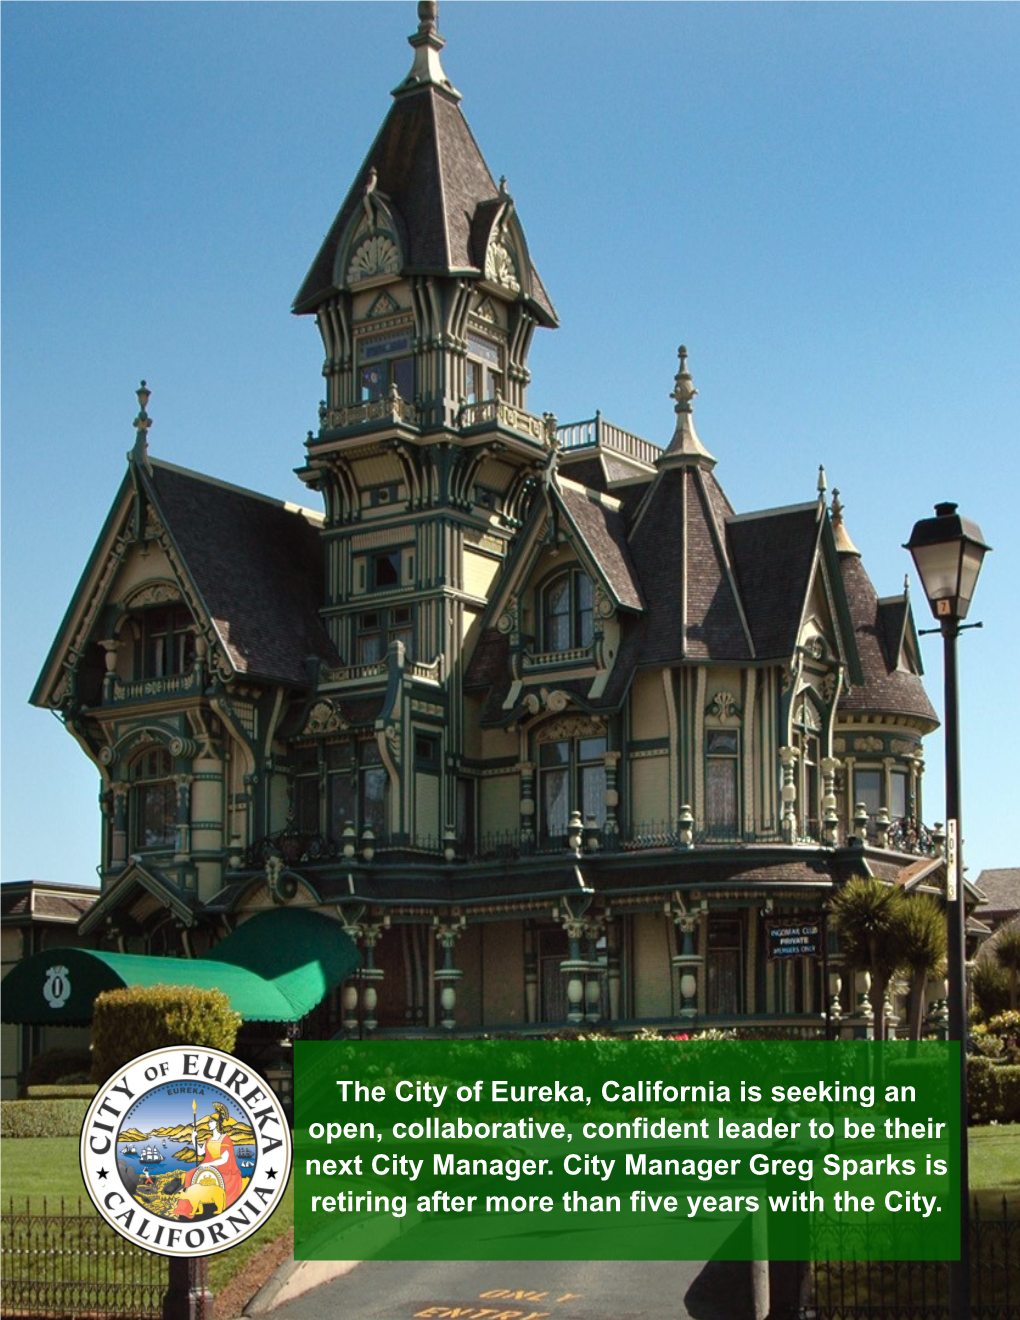 The City of Eureka, California Is Seeking an Open, Collaborative, Confident Leader to Be Their Next City Manager